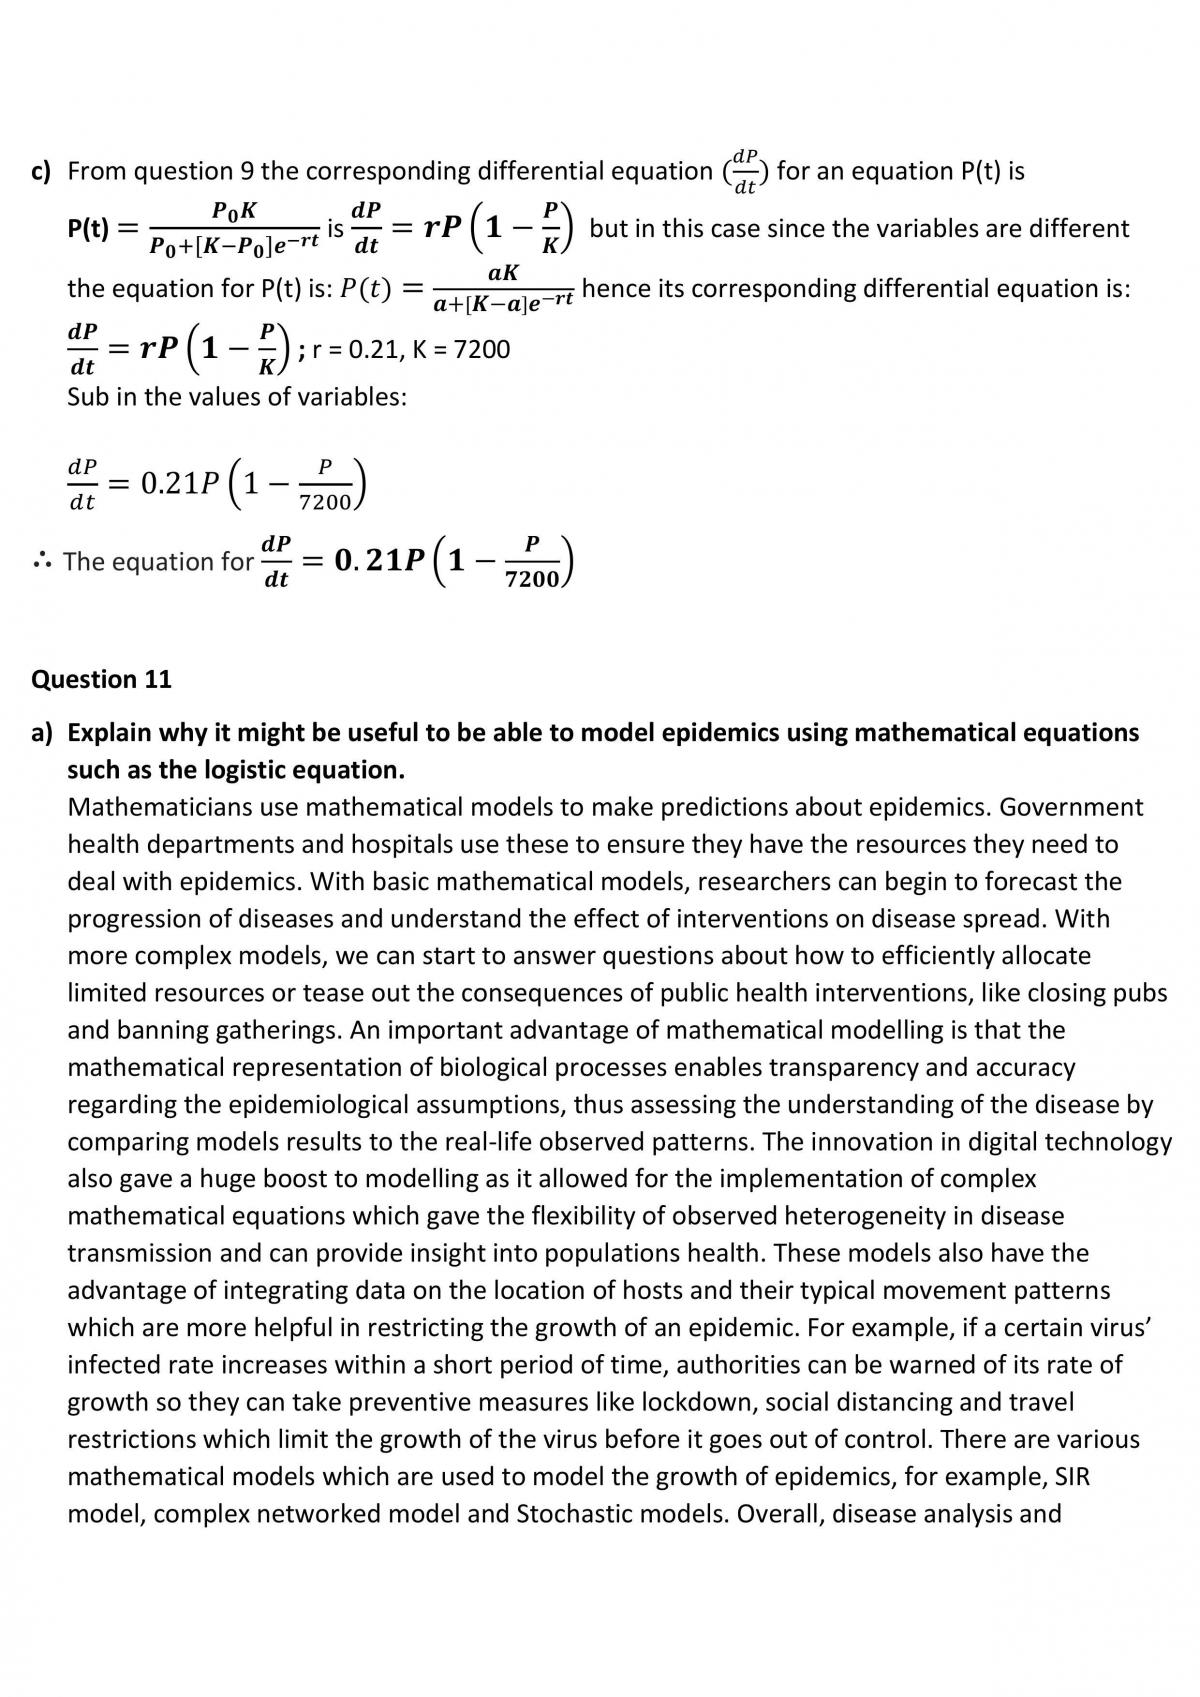 Mathematics Extension Assignment - Logistic Equation  - Page 10